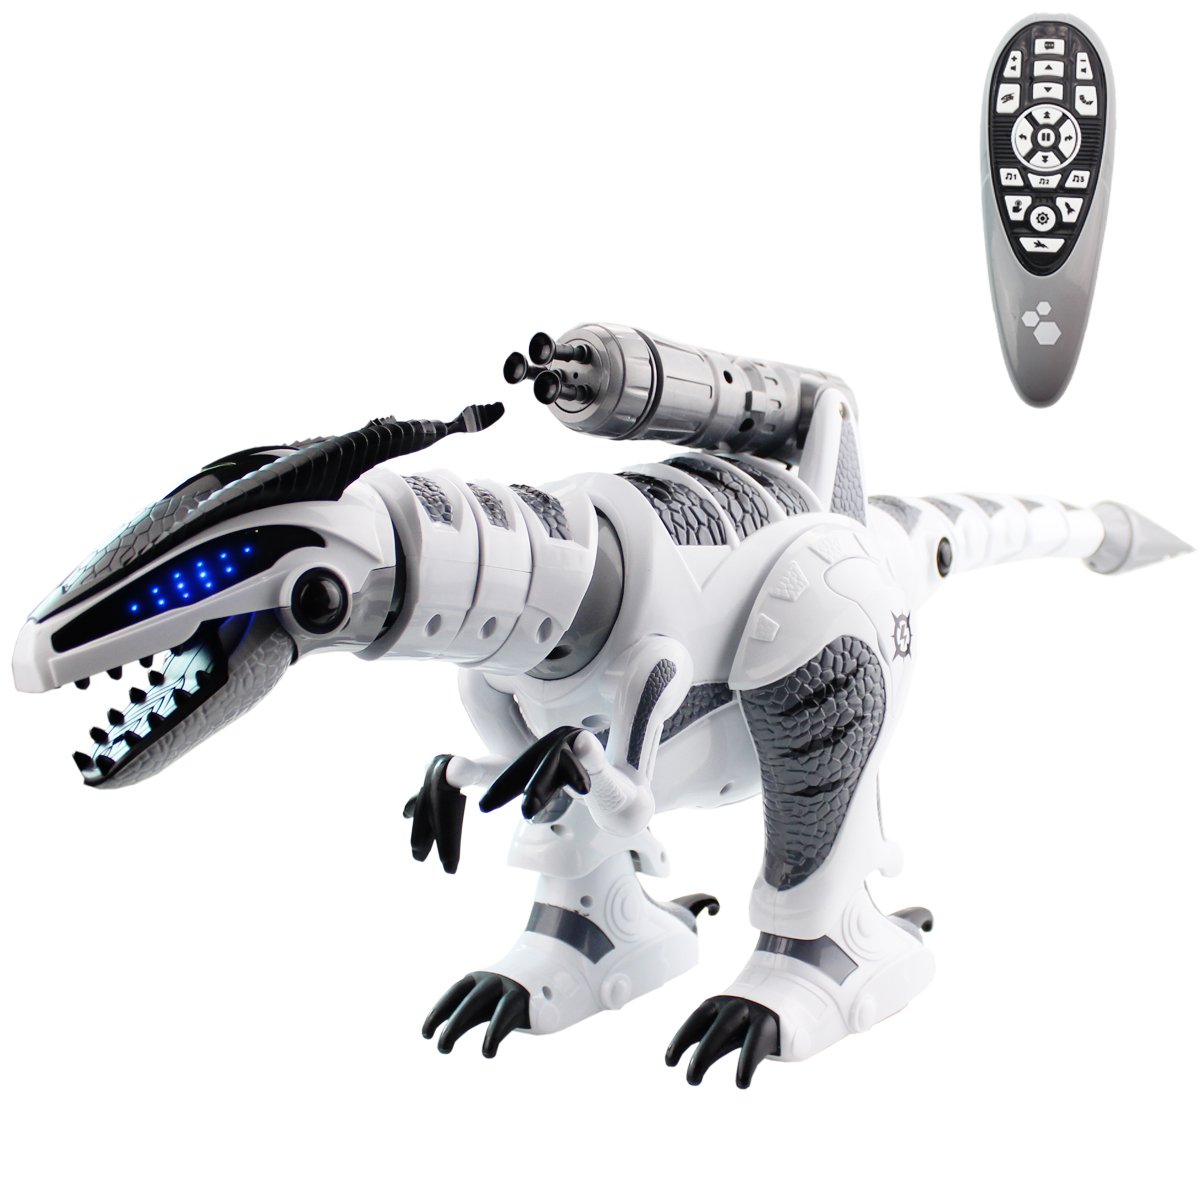 Top 7 Best Robot Dinosaur Toys Reviews in 2022 7